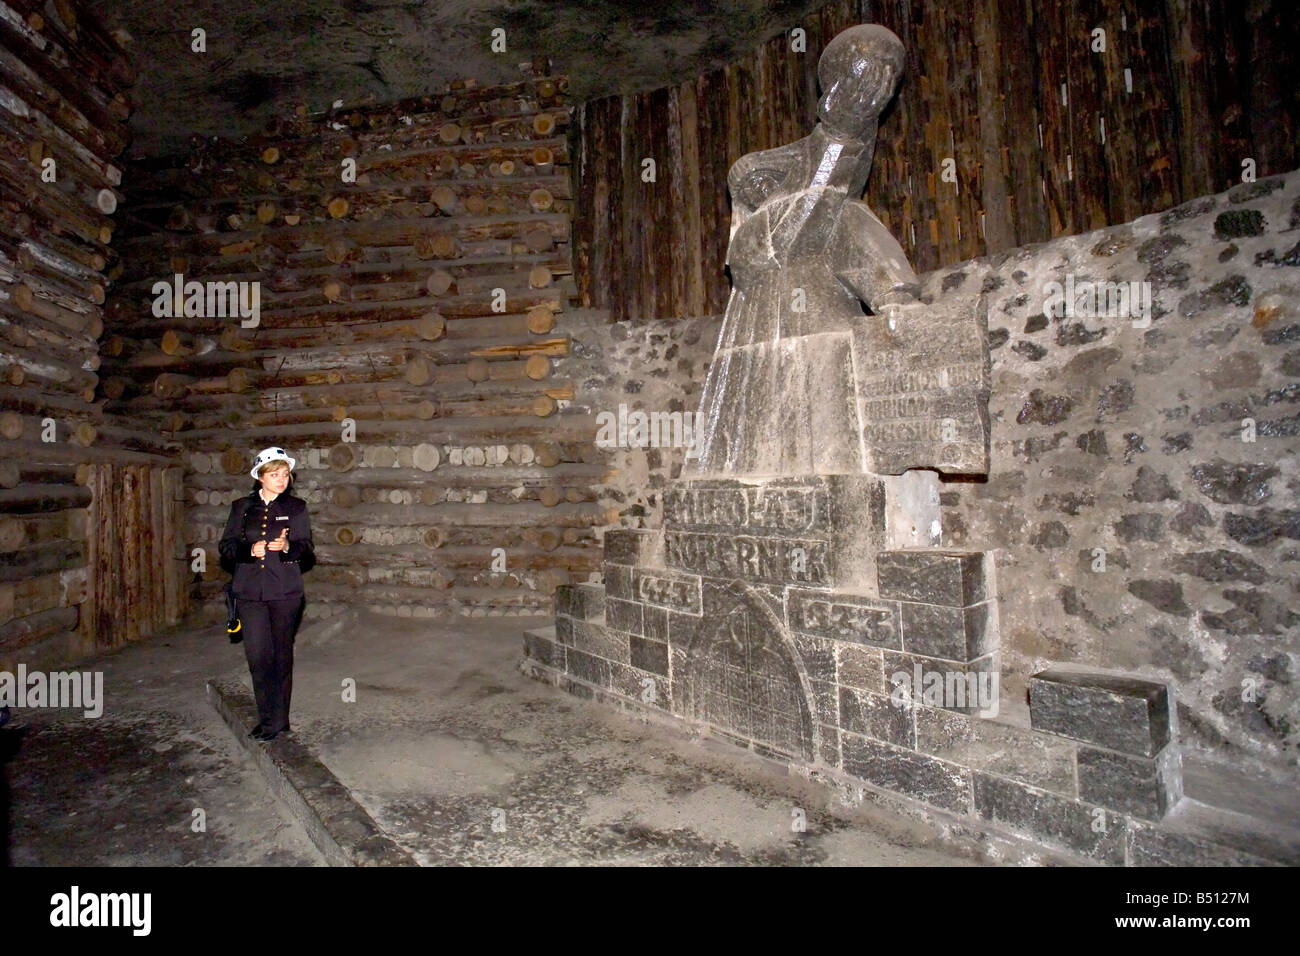 A tour guide explaining about the Nicholas Copernicus Chamber of the Wieliczka Salt Mines in Krakow, Poland. Stock Photo